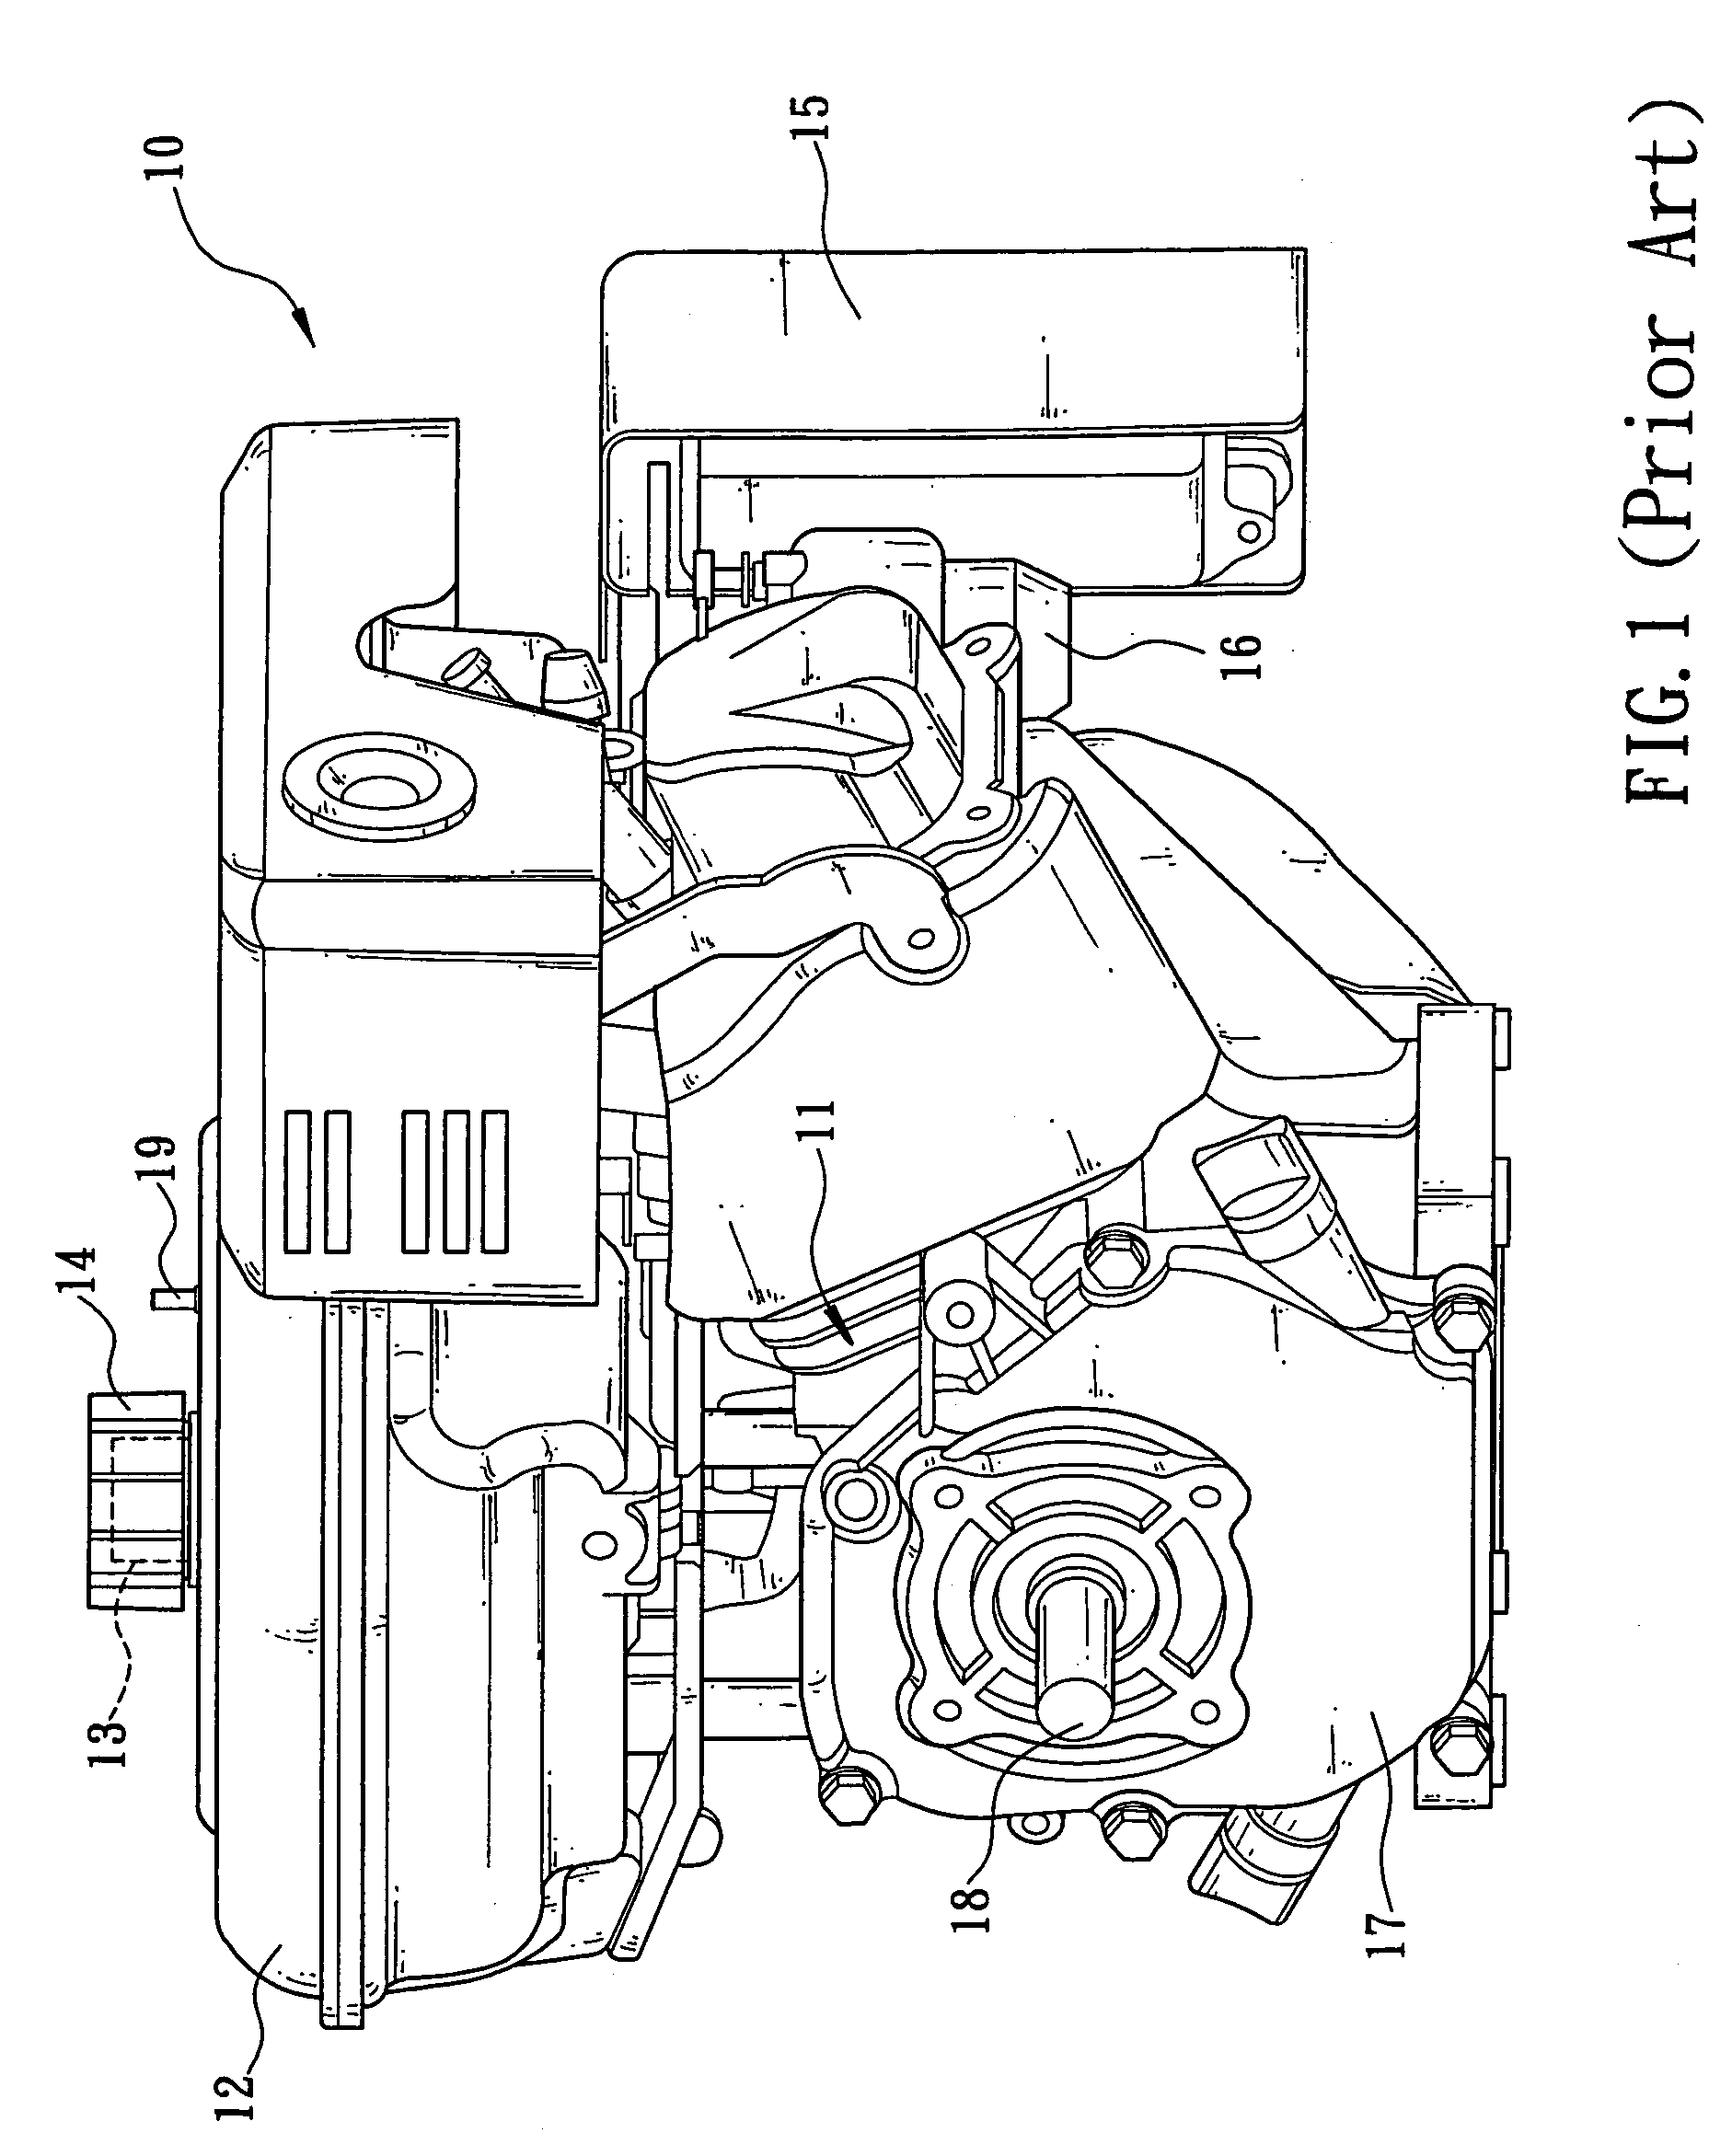 Gas filtering and recirculating device for general machine